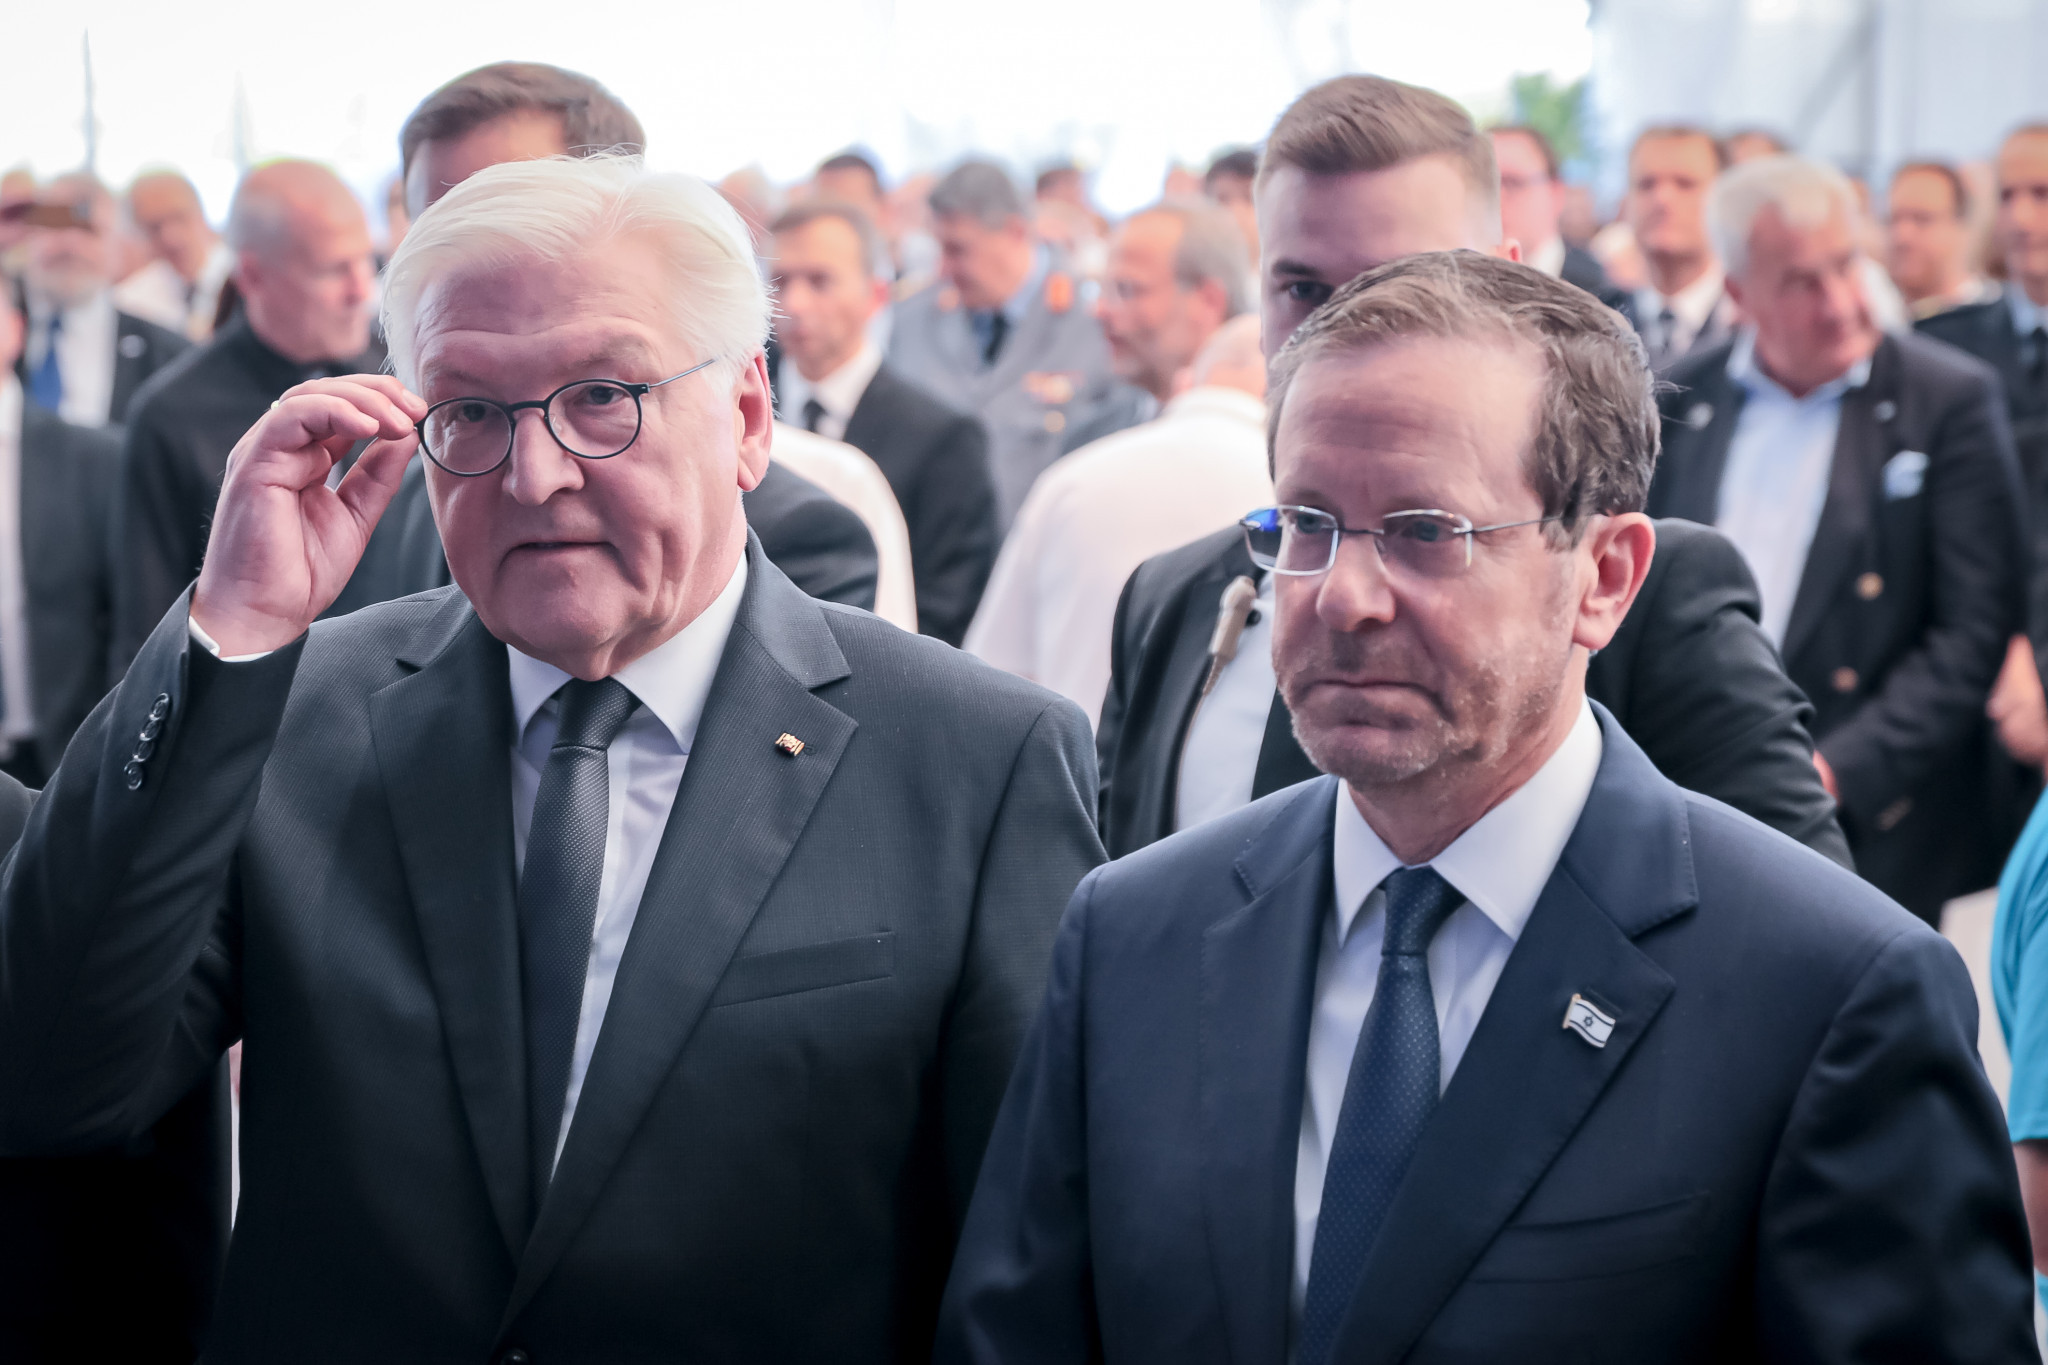 German President Frank-Walter Steinmeier, left and Israeli President Isaac Herzog were both present for the memorial events ©Getty Images